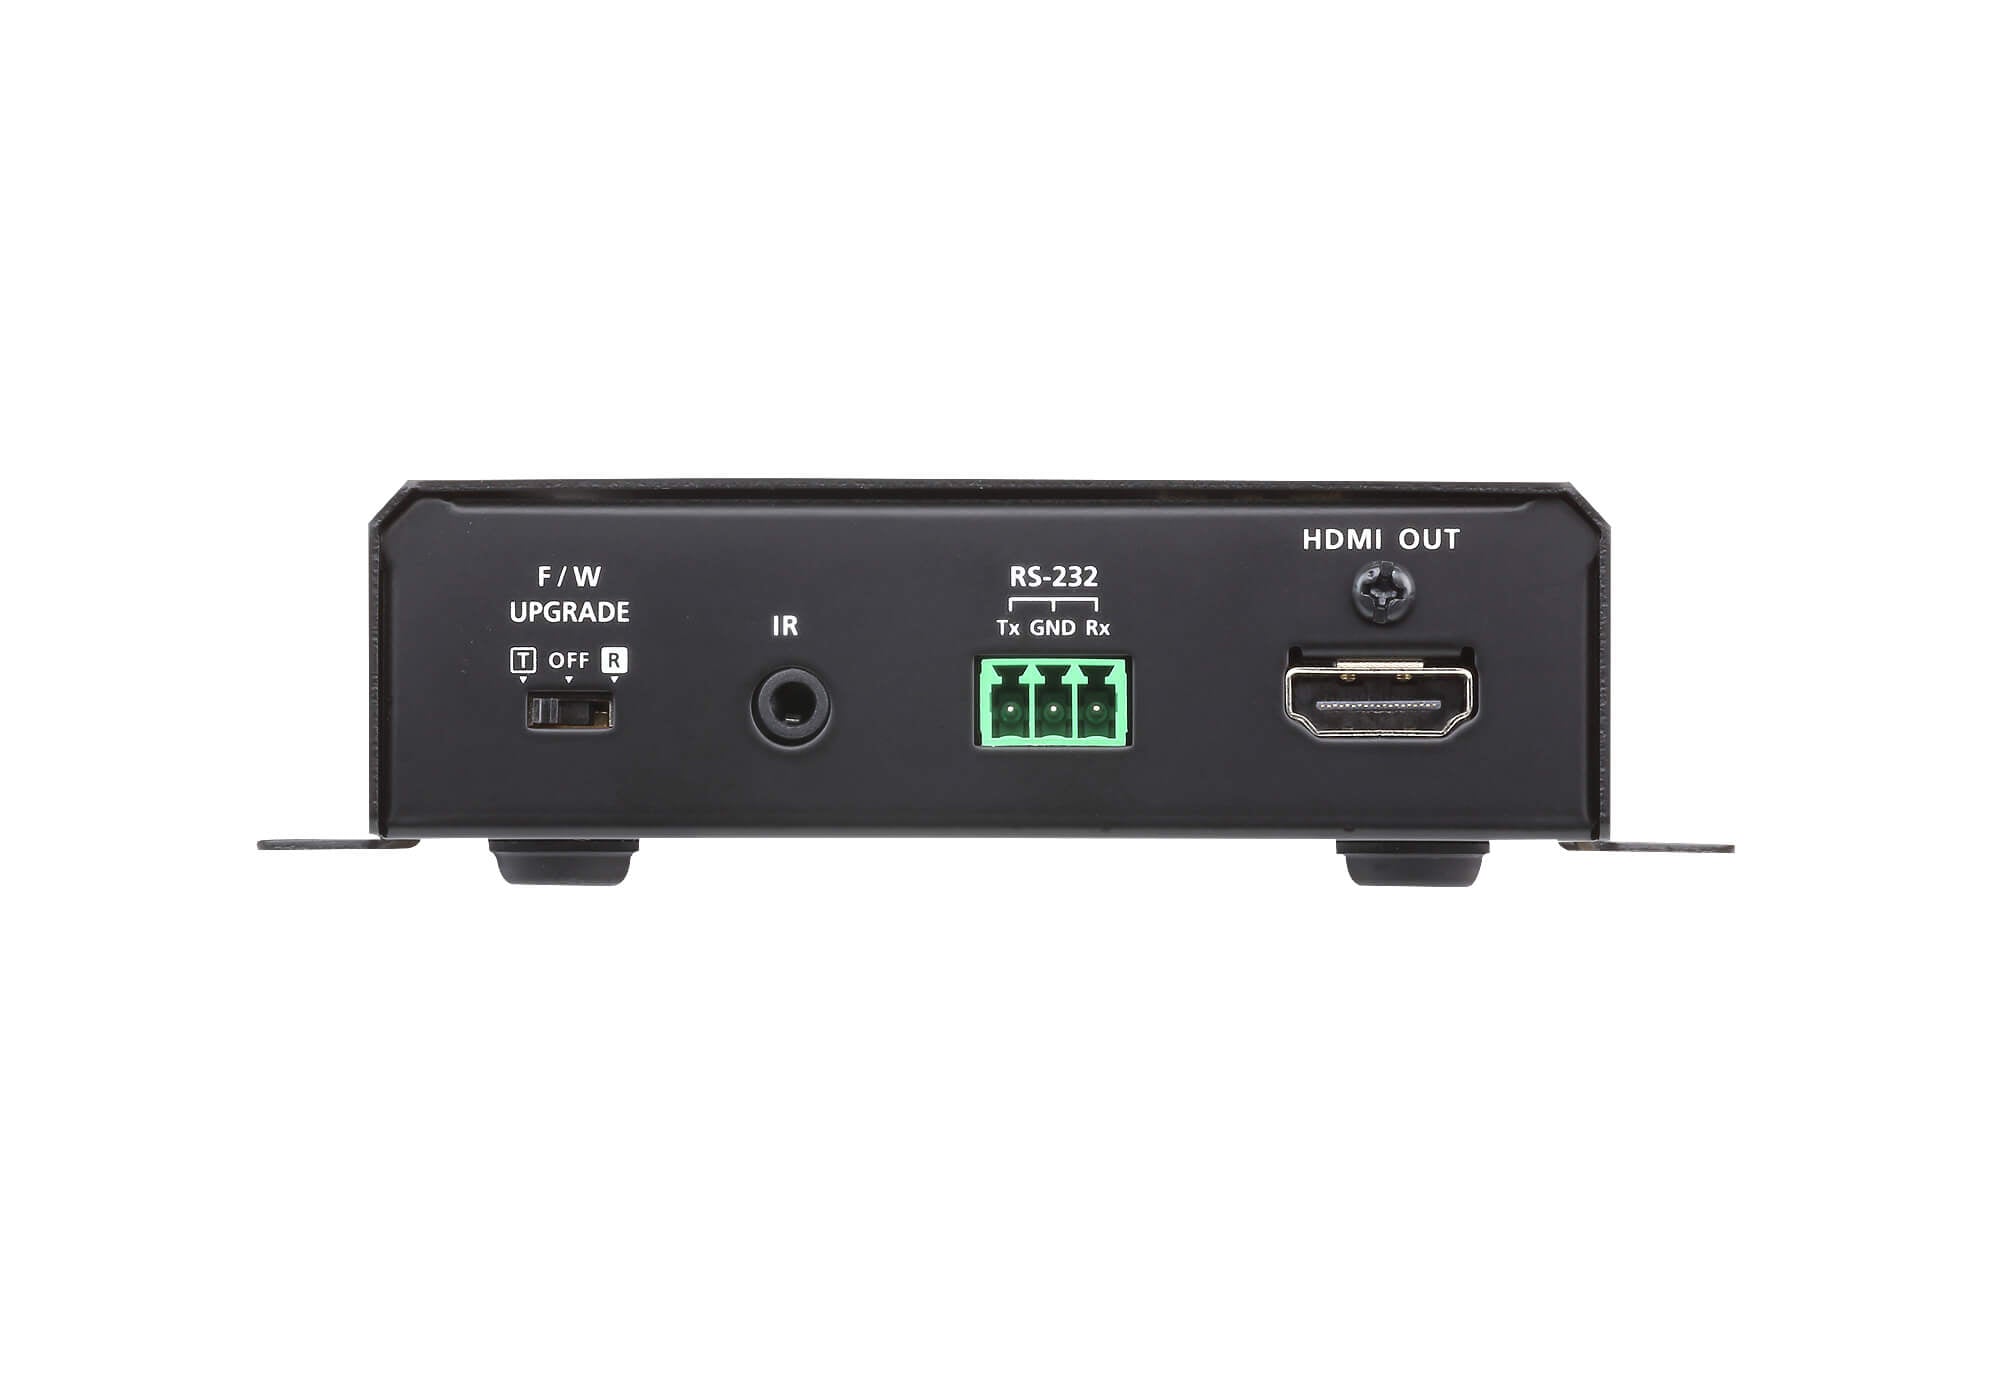 Aten HDMI HDBaseT Receiver with PoH (4K@100m) (HDBaseT Class A) (PoH PD) -VE1812R (3 Year Manufacture Local Warranty In Singapore)